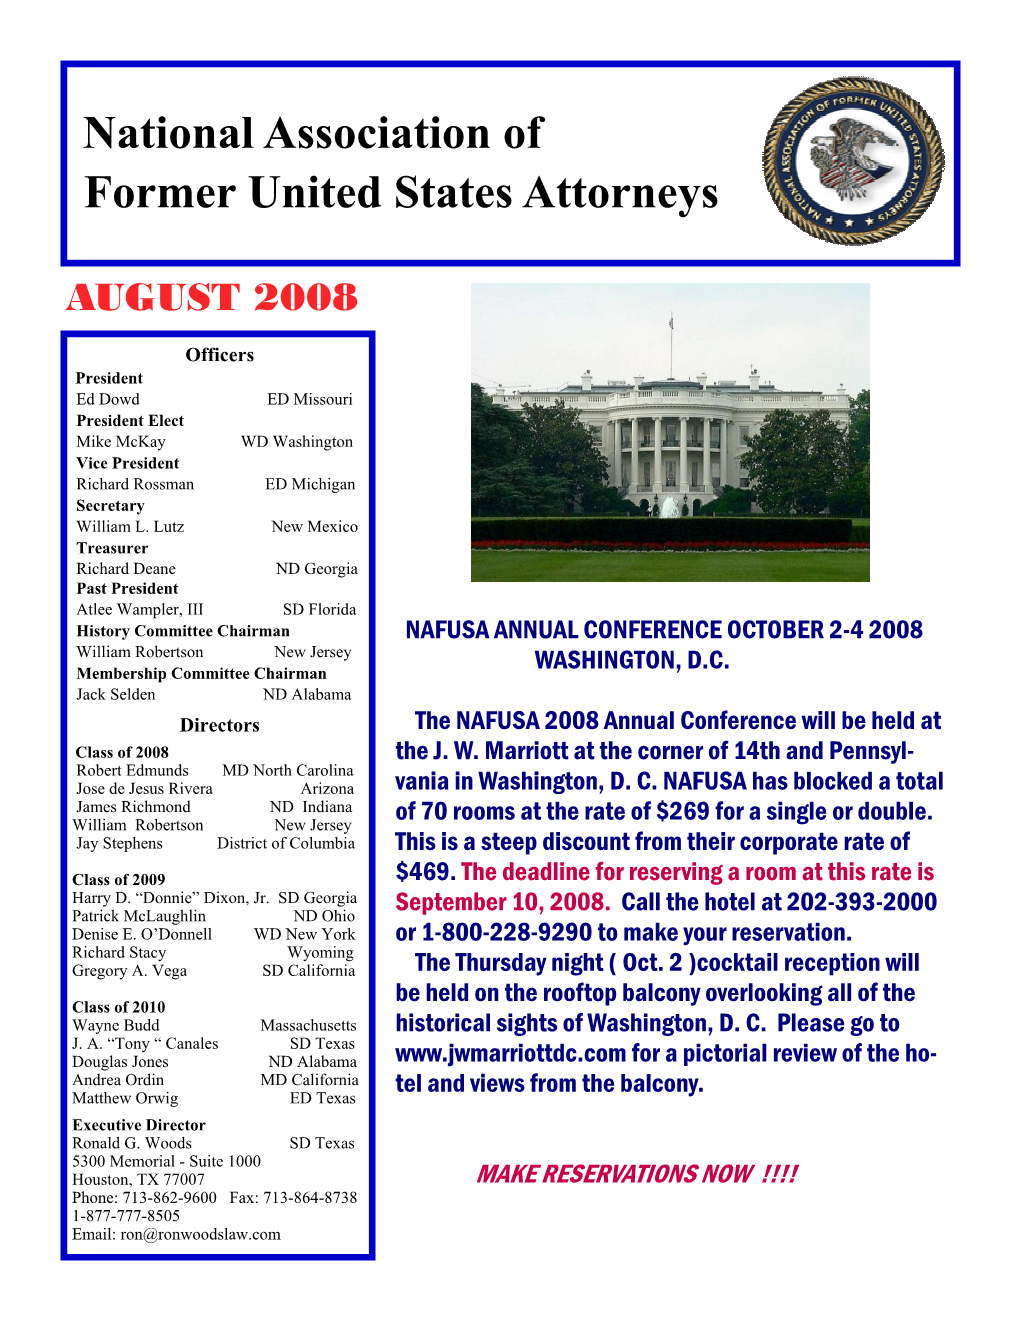 National Association of Former United States Attorneys